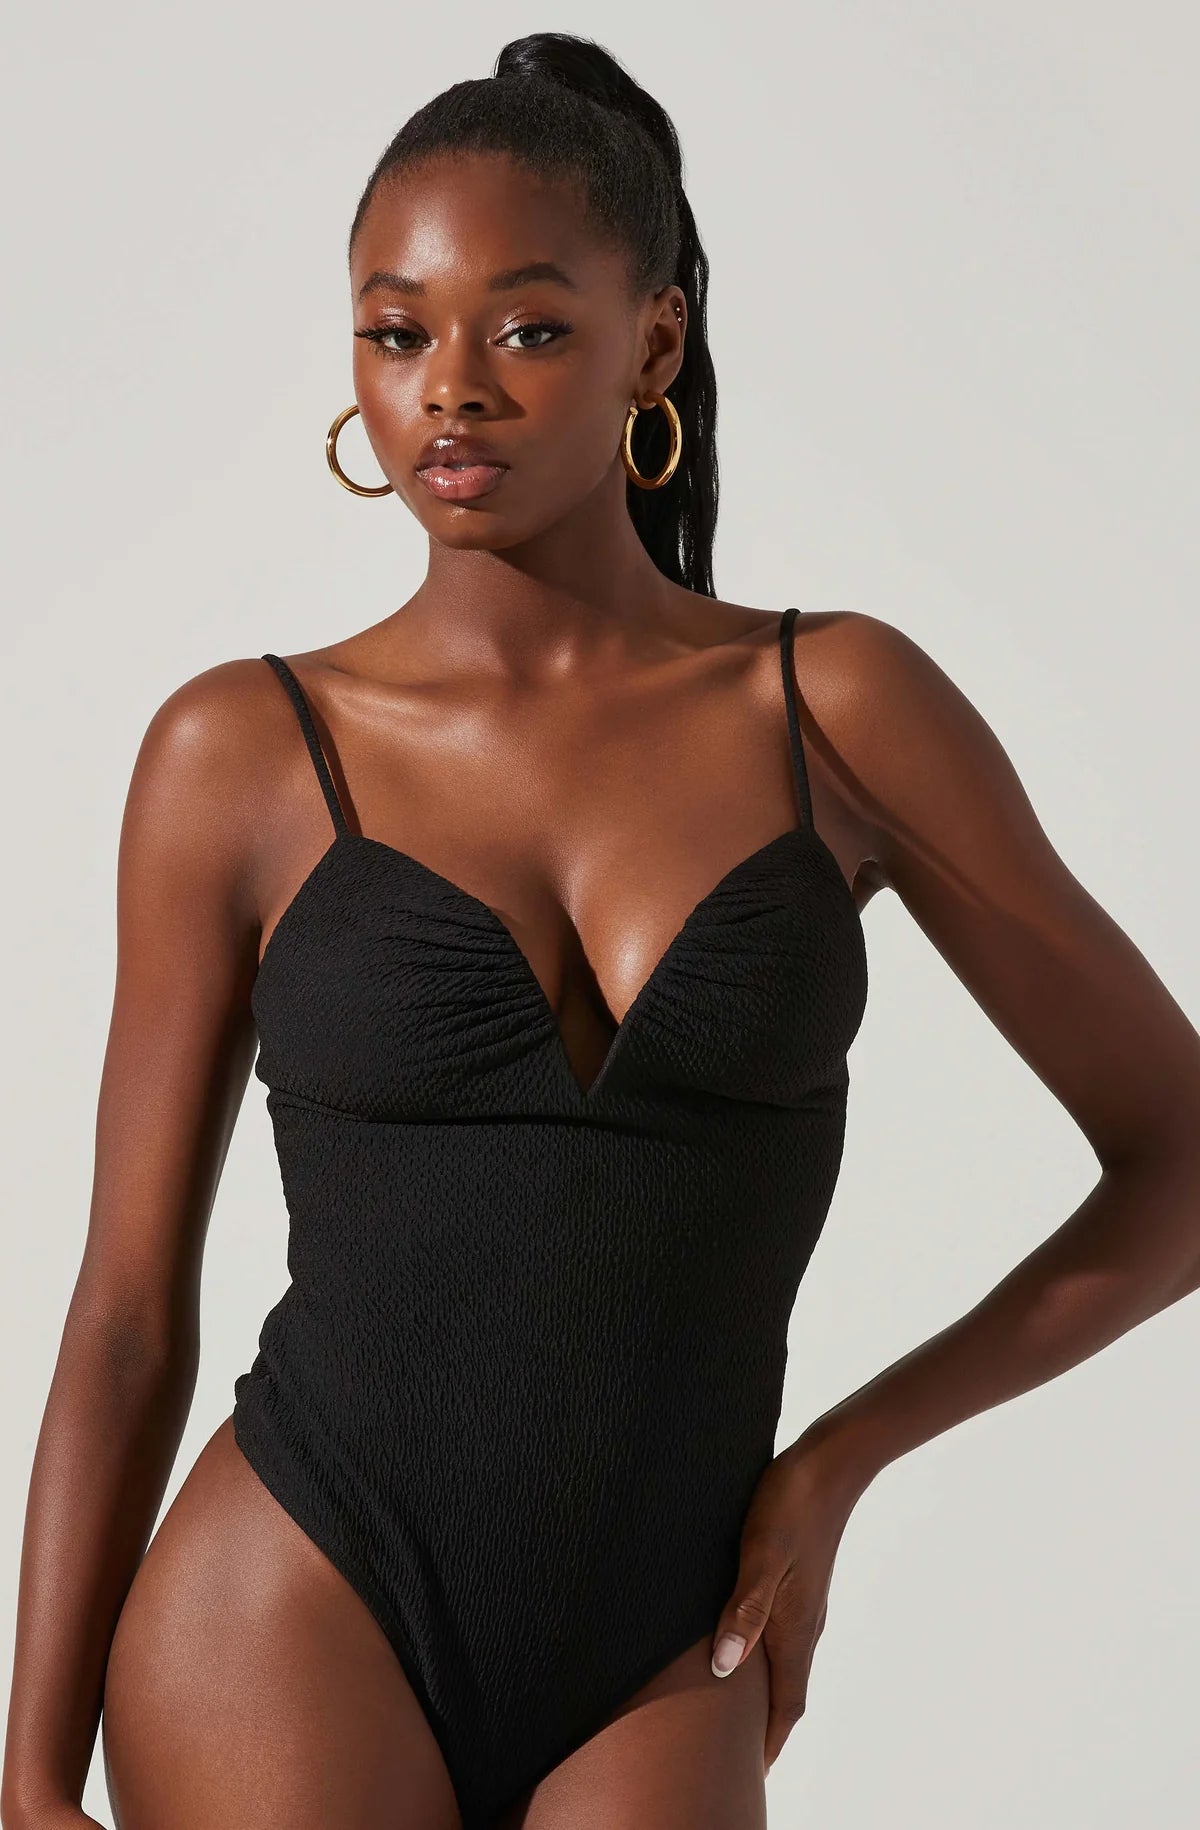 Model wearing Fia Crinkled Plunge Bodysuit in Black from ASTR The Label available at UniKoncept in Waterloo